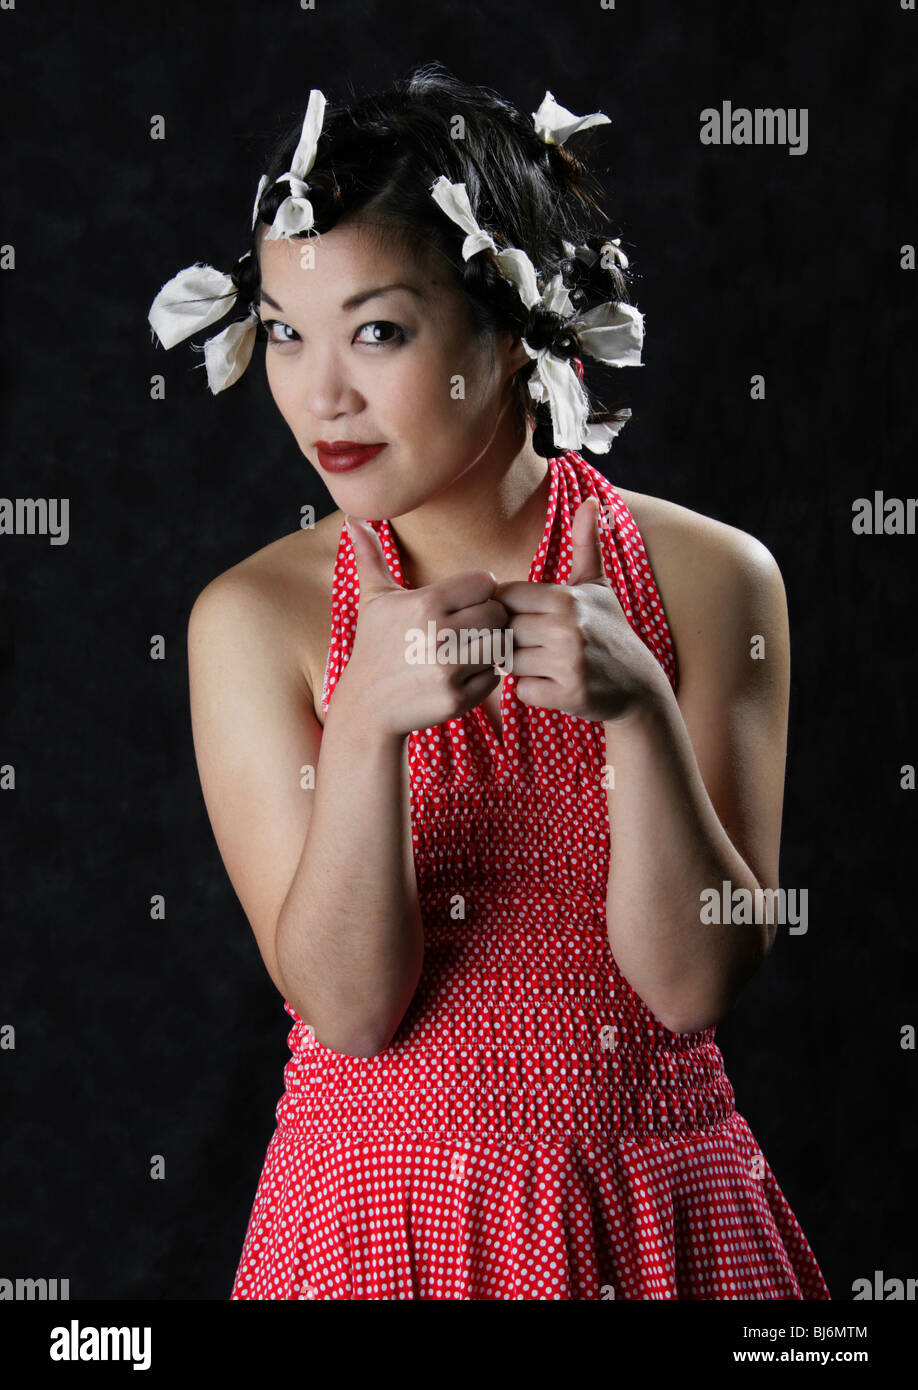 Happy Smiling Chinese Girl Wearing a White Spotted Red Dress with Paper Ties in Her Hair. Stock Photo